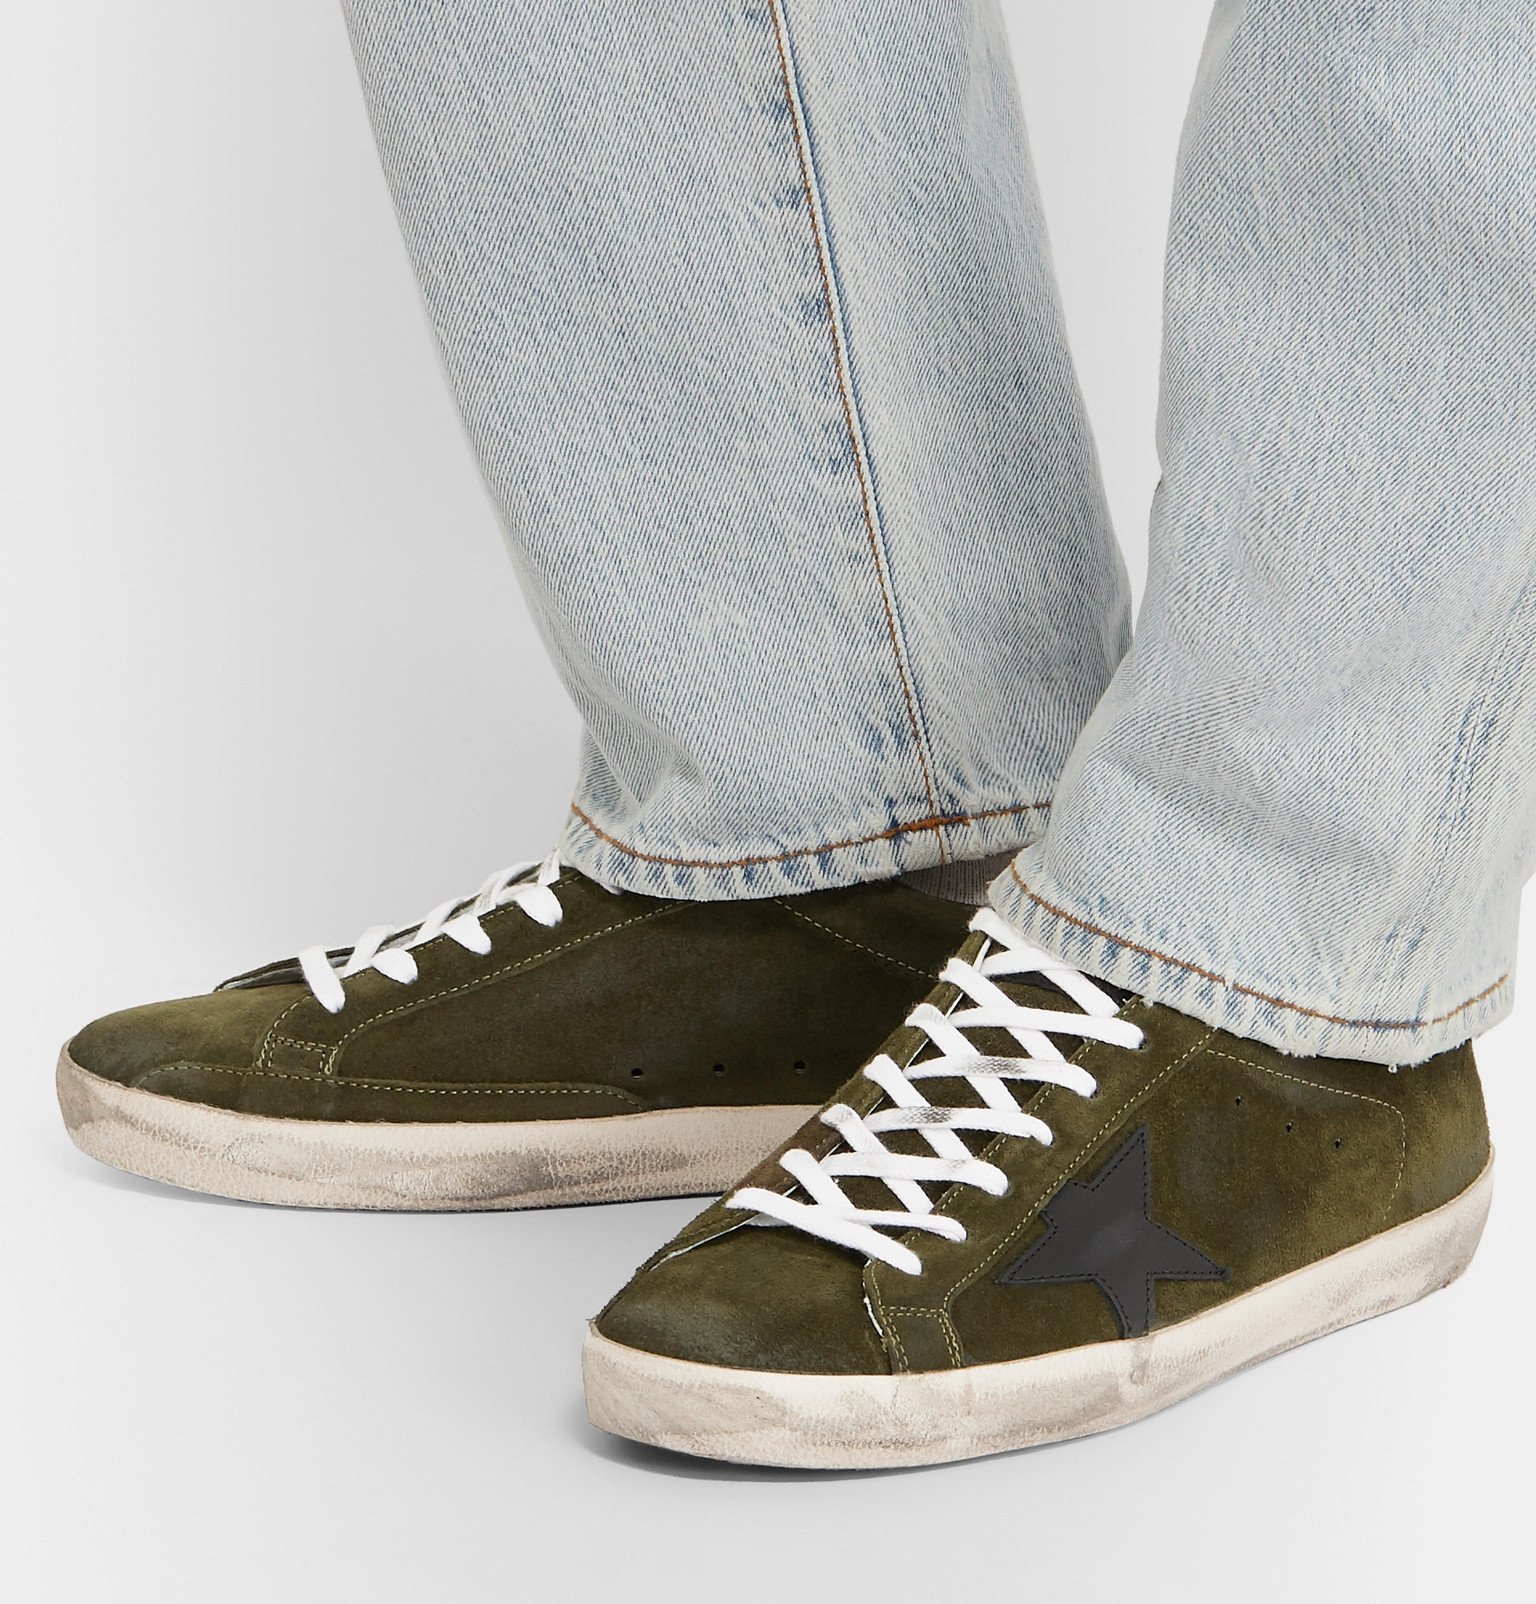 Golden Goose - Superstar Distressed Suede and Leather Sneakers 